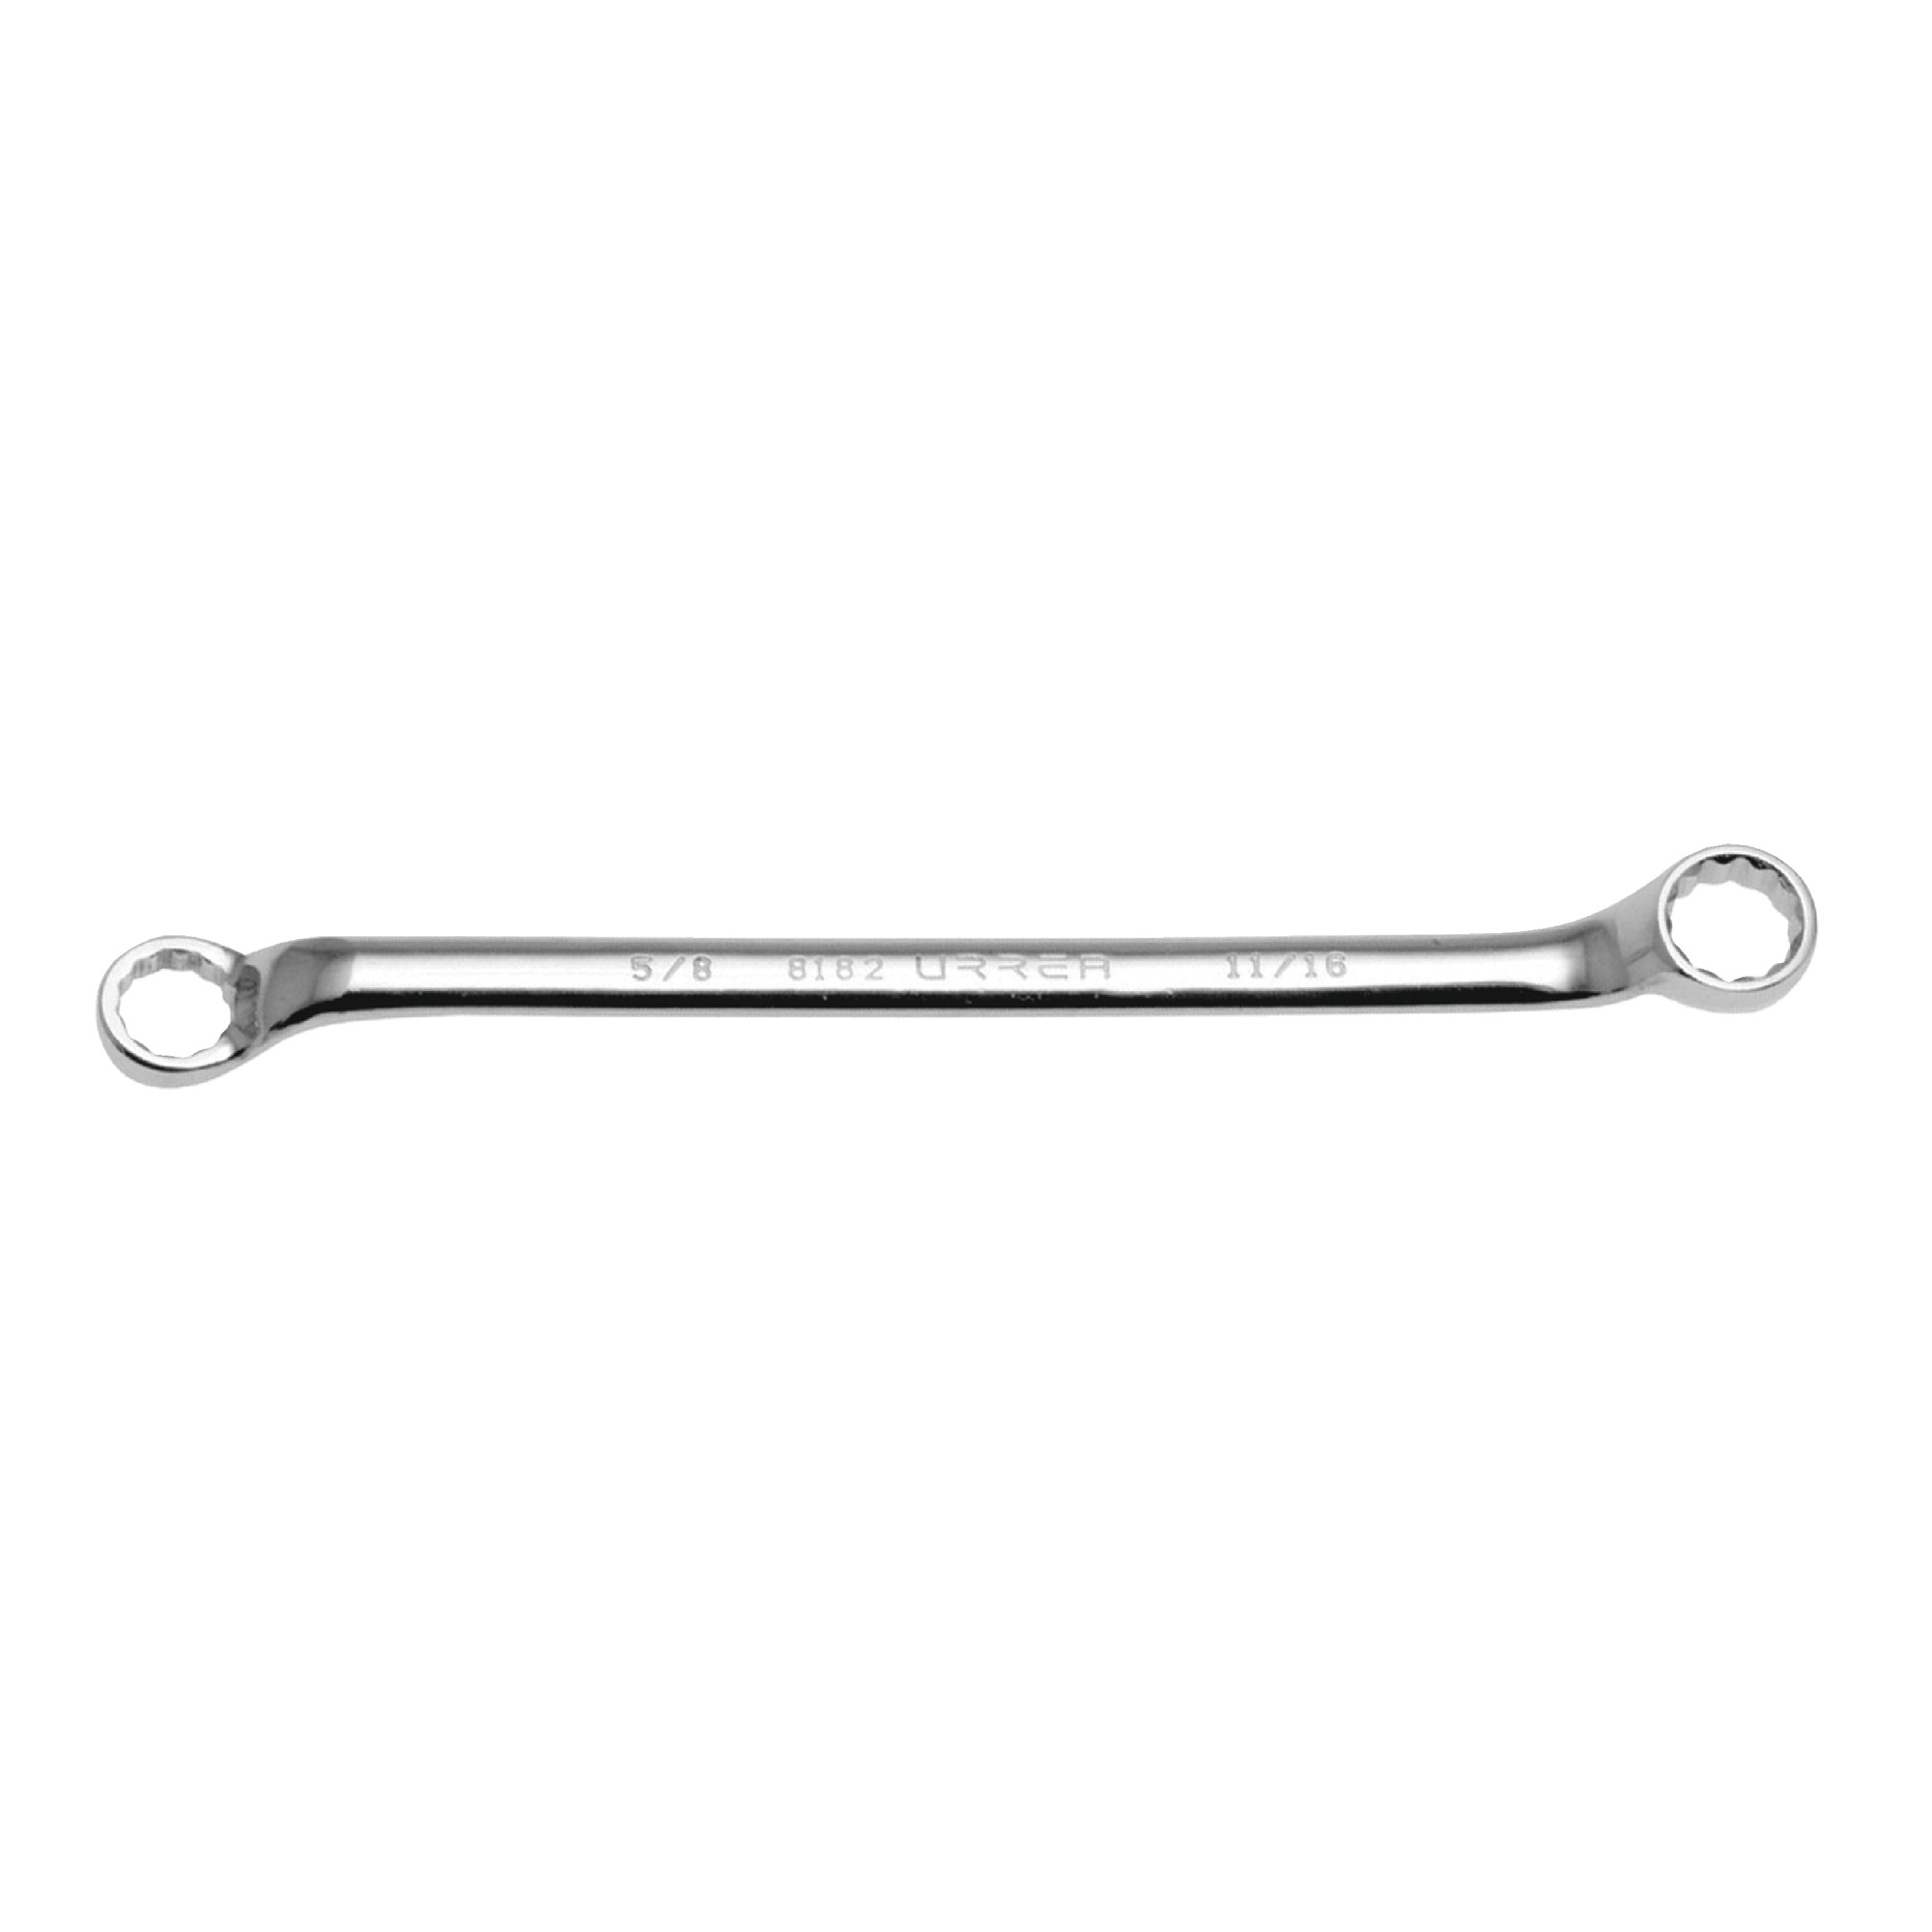 81617 16mm x 17mm Chrome Finish 12 Point Box Wrench